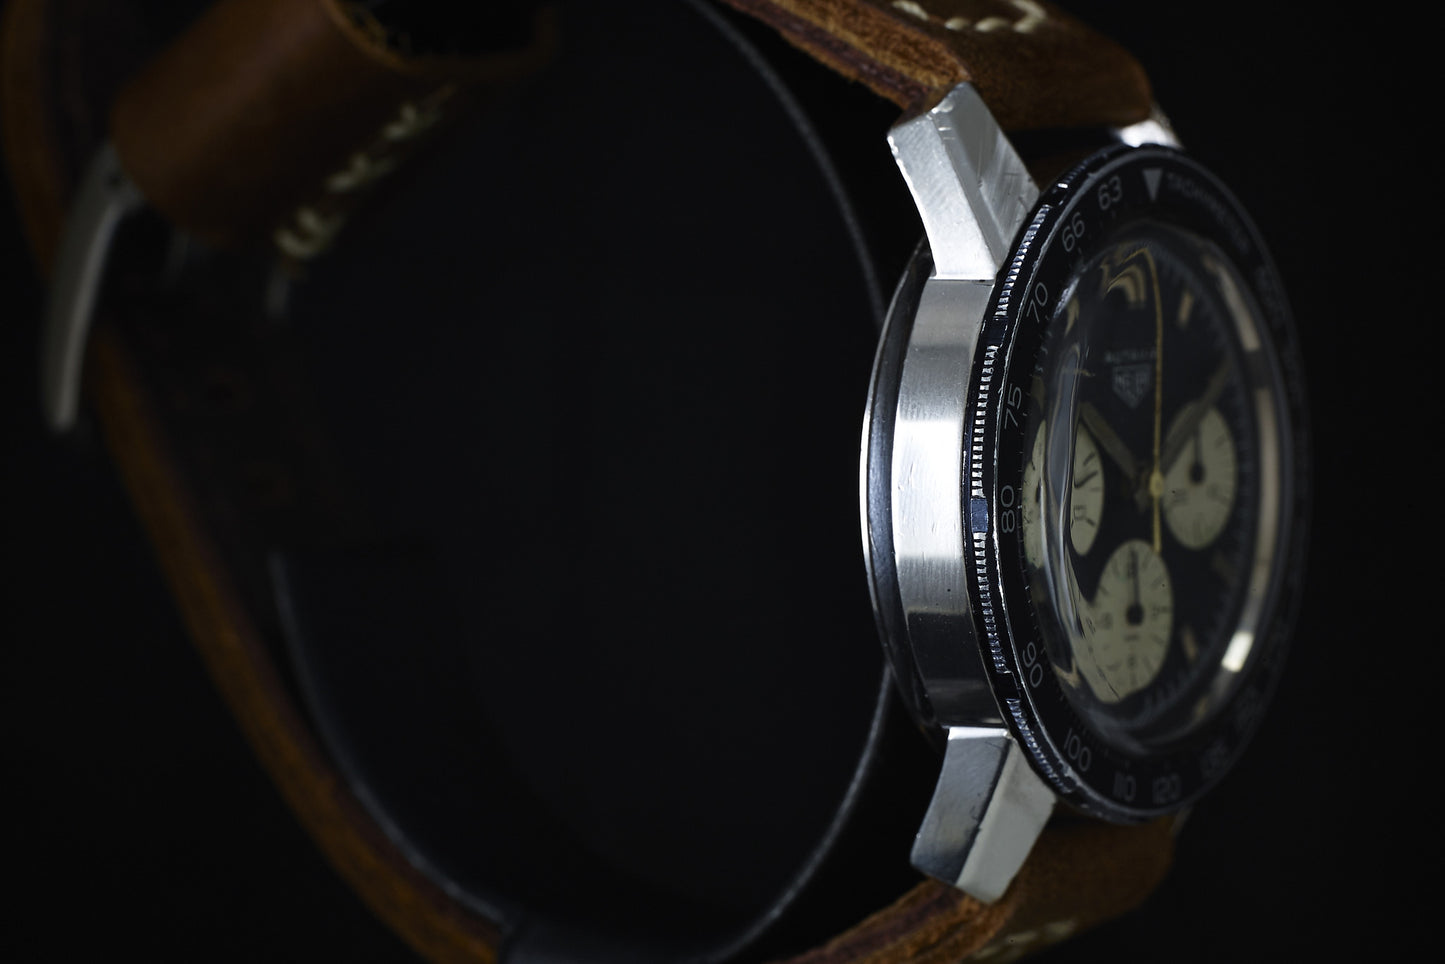 Heuer Autavia 2446C Chronograph - Presented in Collaboration with Gear Patrol!